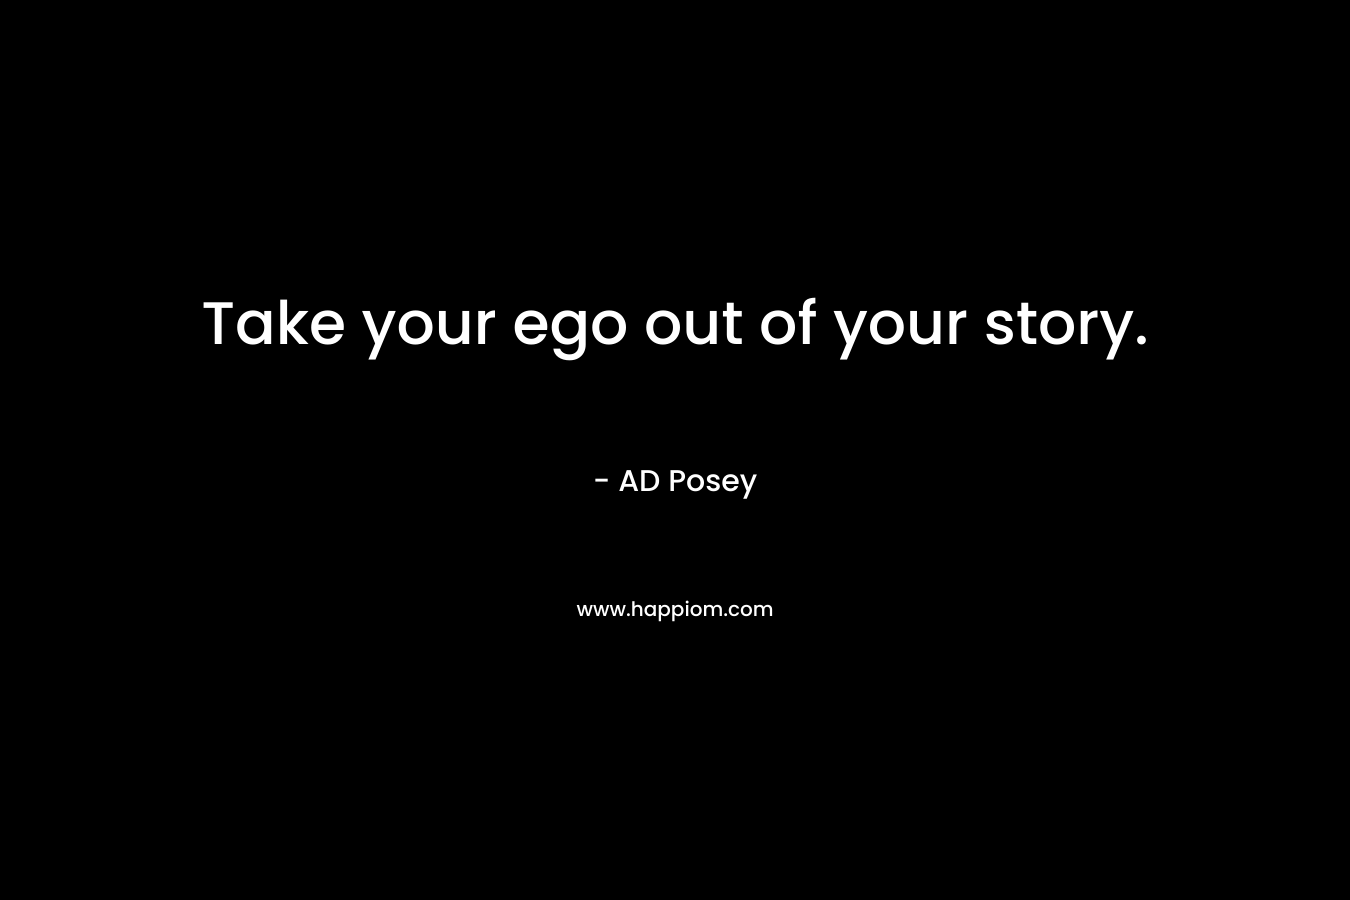 Take your ego out of your story. – AD Posey